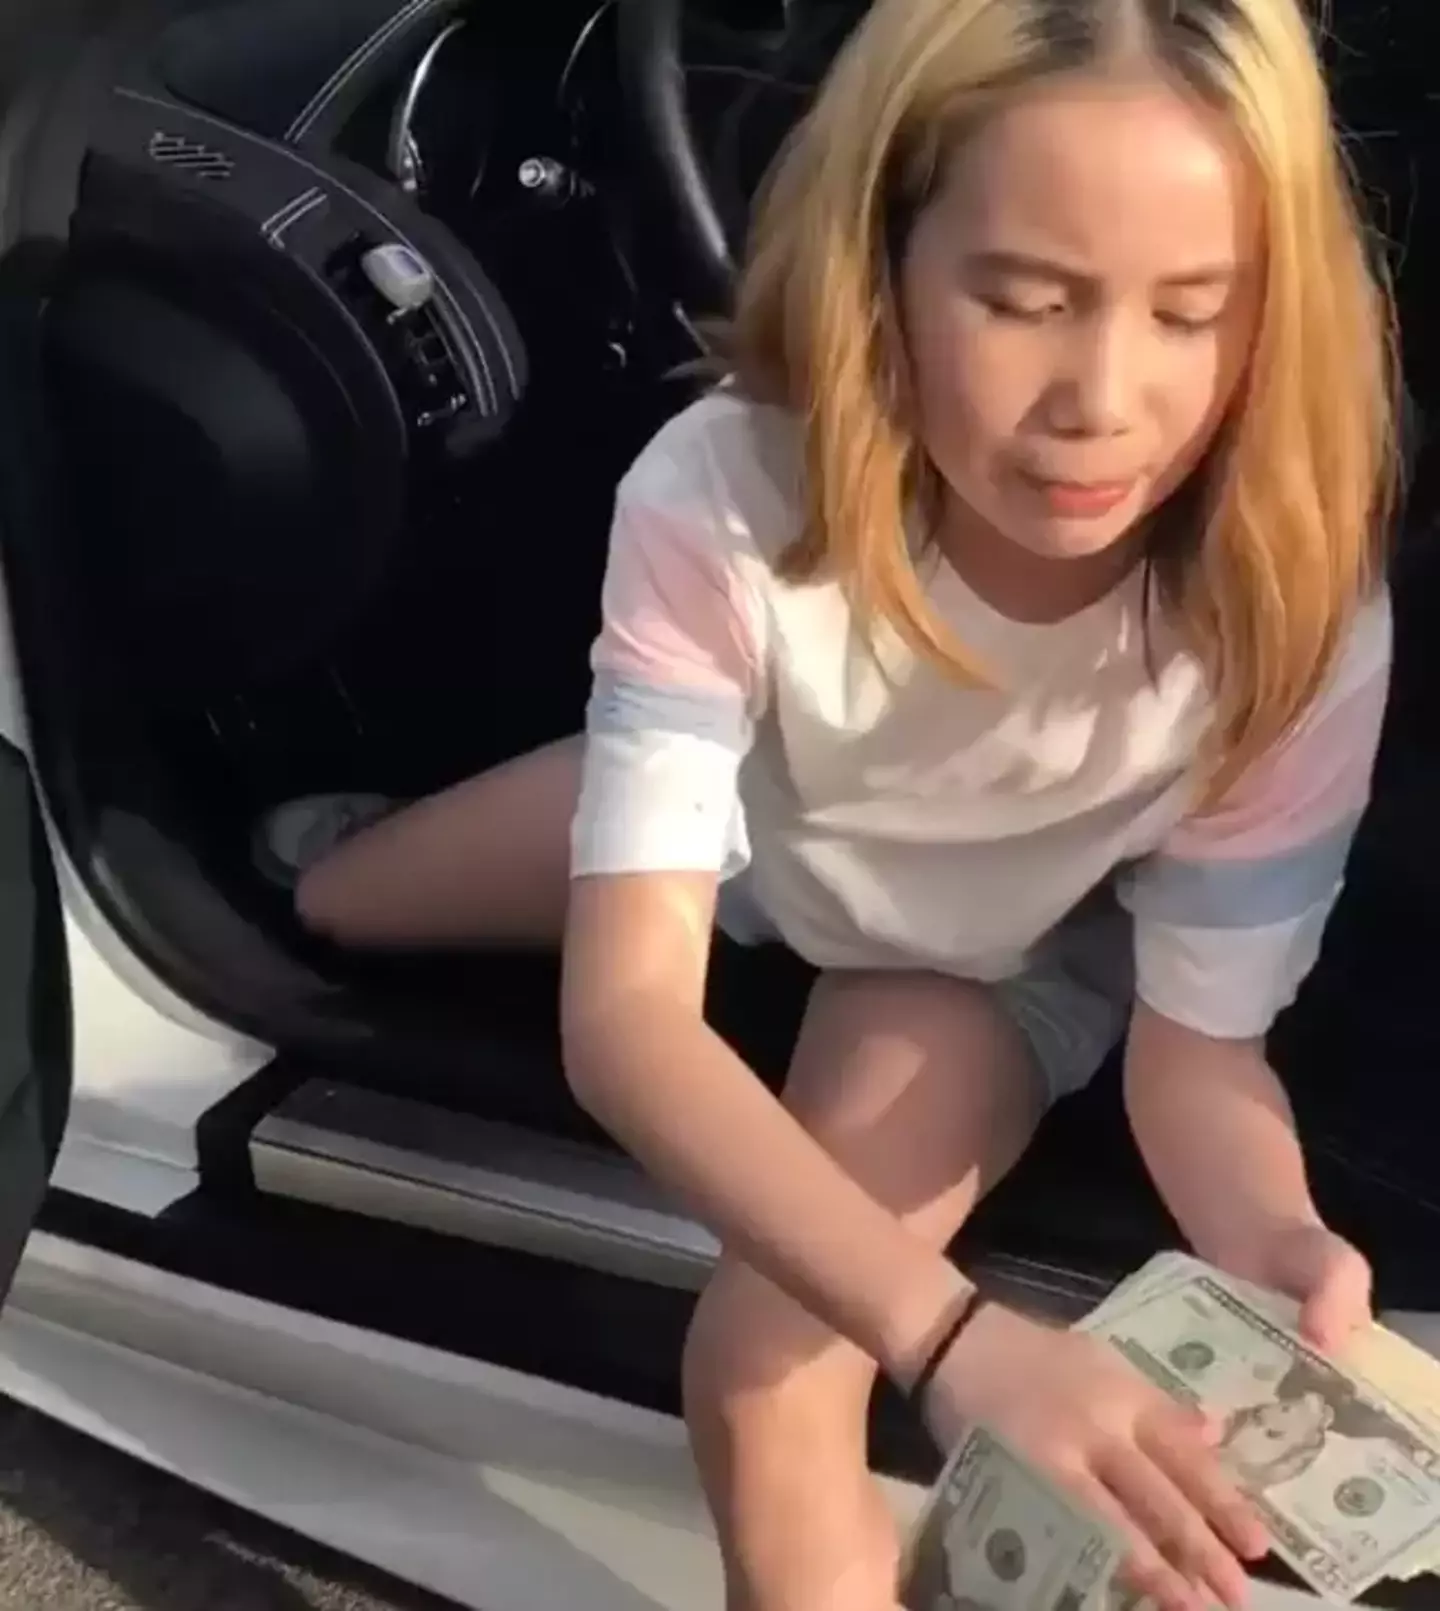 Lil Tay shot to fame in 2018 after a rap video went viral.